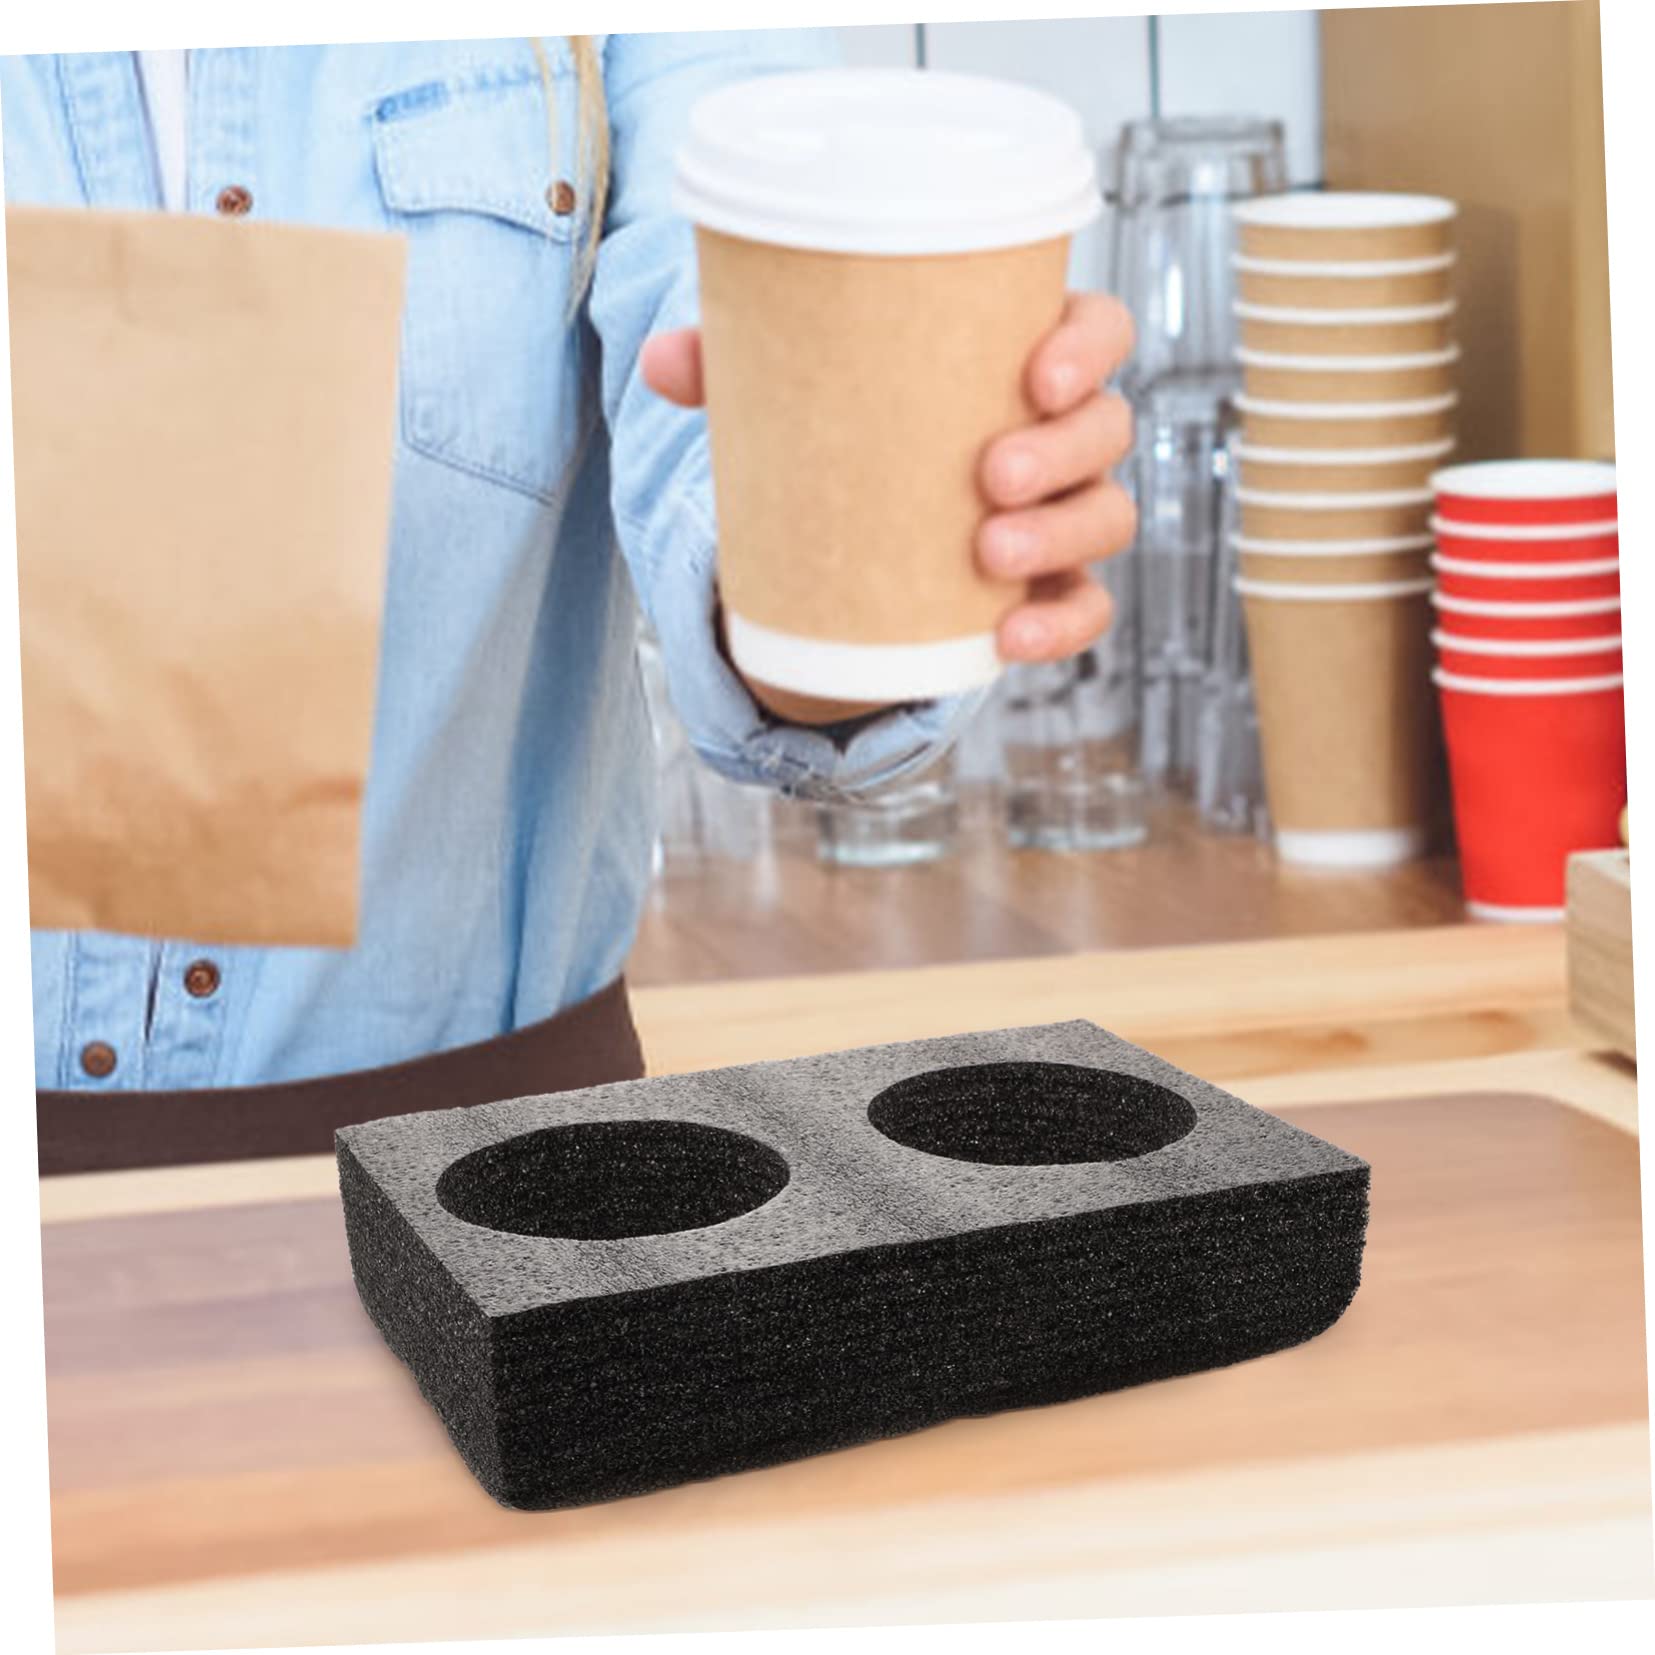 YARNOW 2pcs Takeaway Cup Holder Beer Pong Pool Float Door Dash Clip on Cup Holder Dish Carrier 2 Bowls Holder Tray Coffee Carrier Tray Reusable Drink Epe Pearl Cotton Refreshments Basket